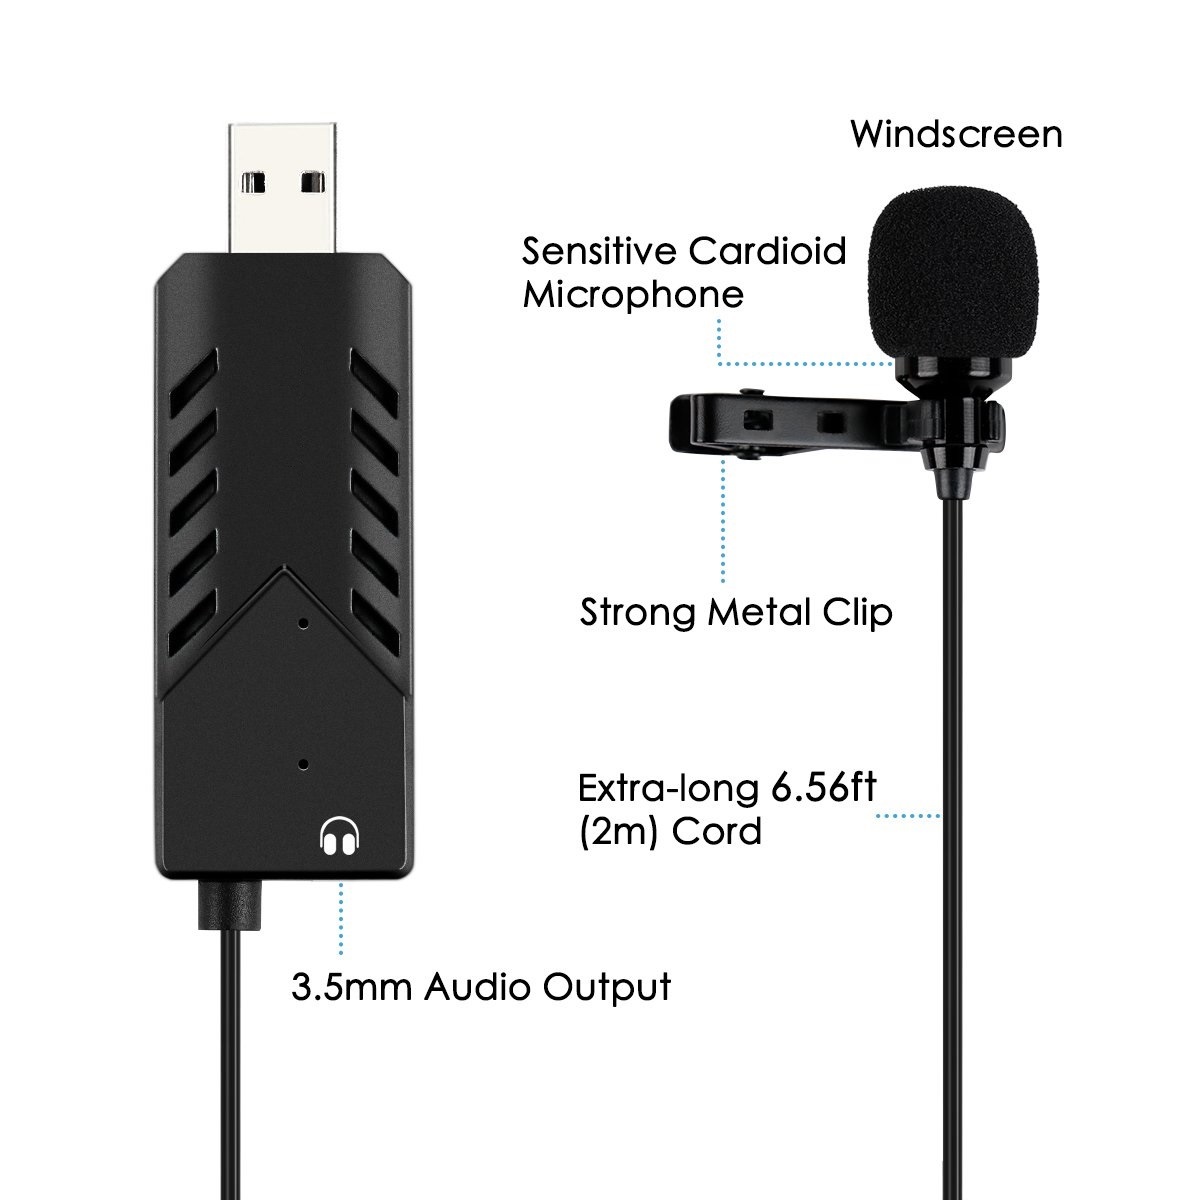 15m-USB-Lapel-Collar-Microphone-Omnidirectional-Mic-with-Sound-Card-for-PC-Computer-Mobile-Phones-fo-1605071